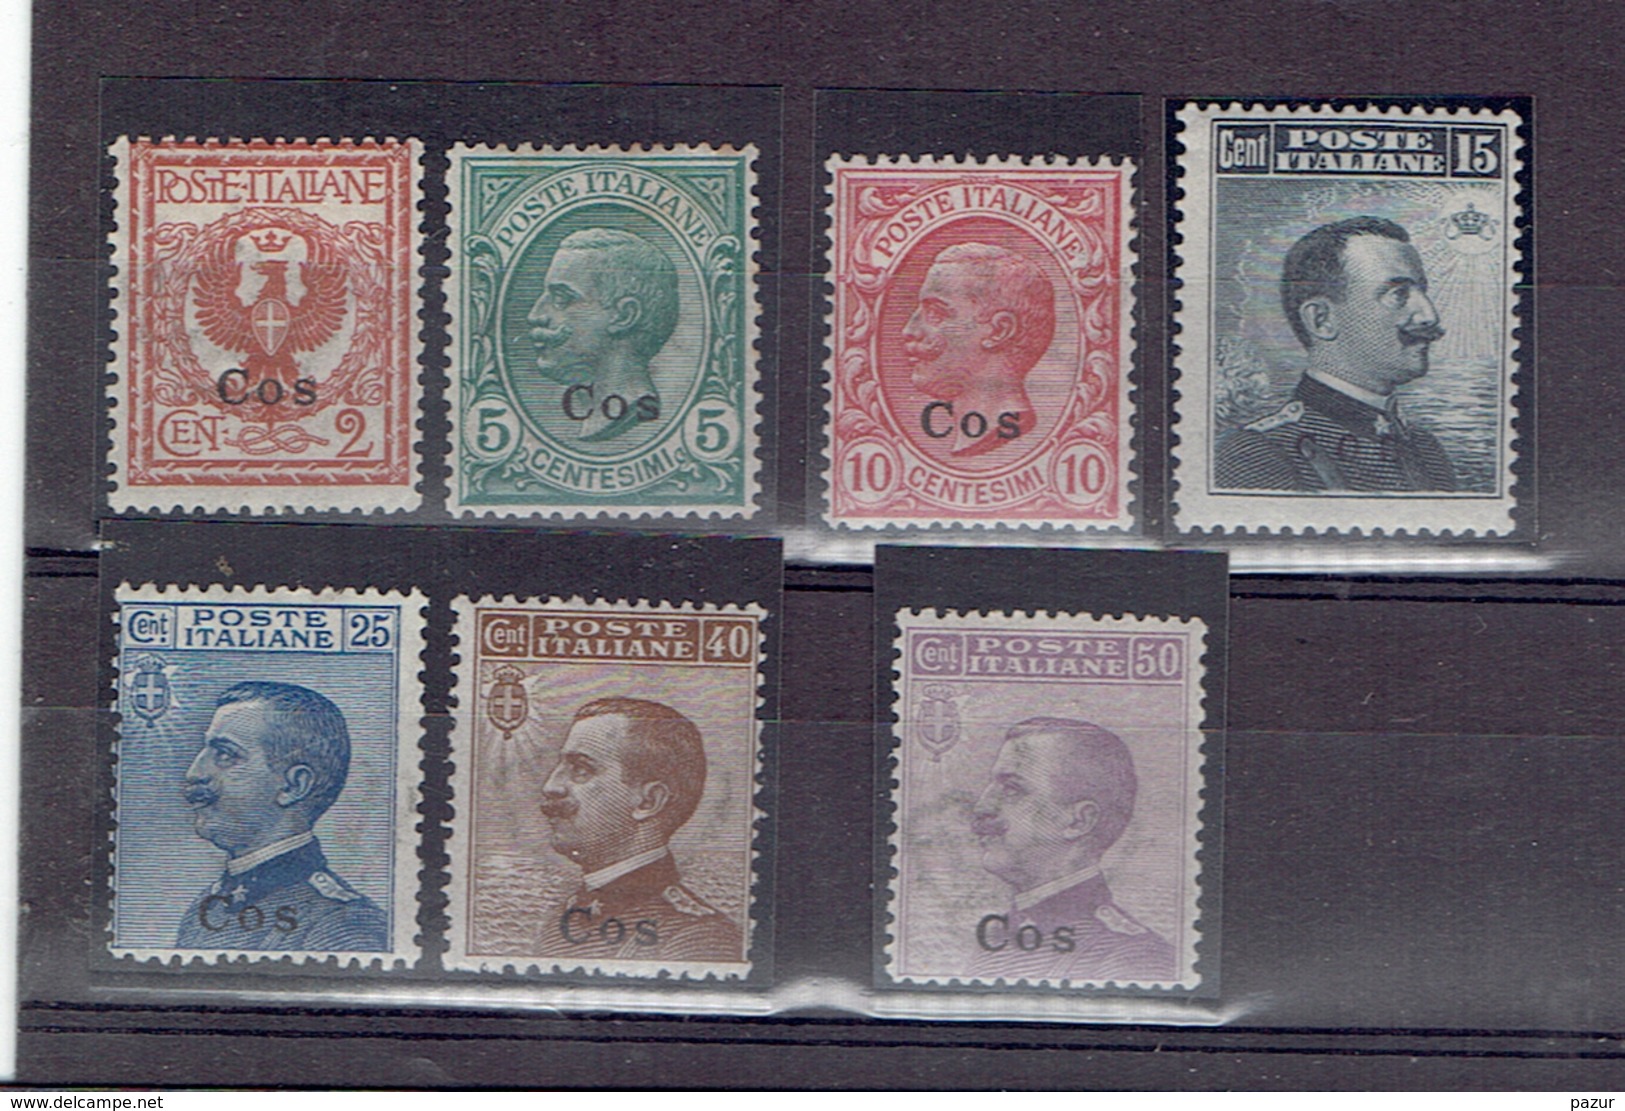 TP -1912 - GRECE - EGEE - COS  OCCUPATION ITALIENNE N°1/2/3/4/6/7/8 X - TB - Unused Stamps